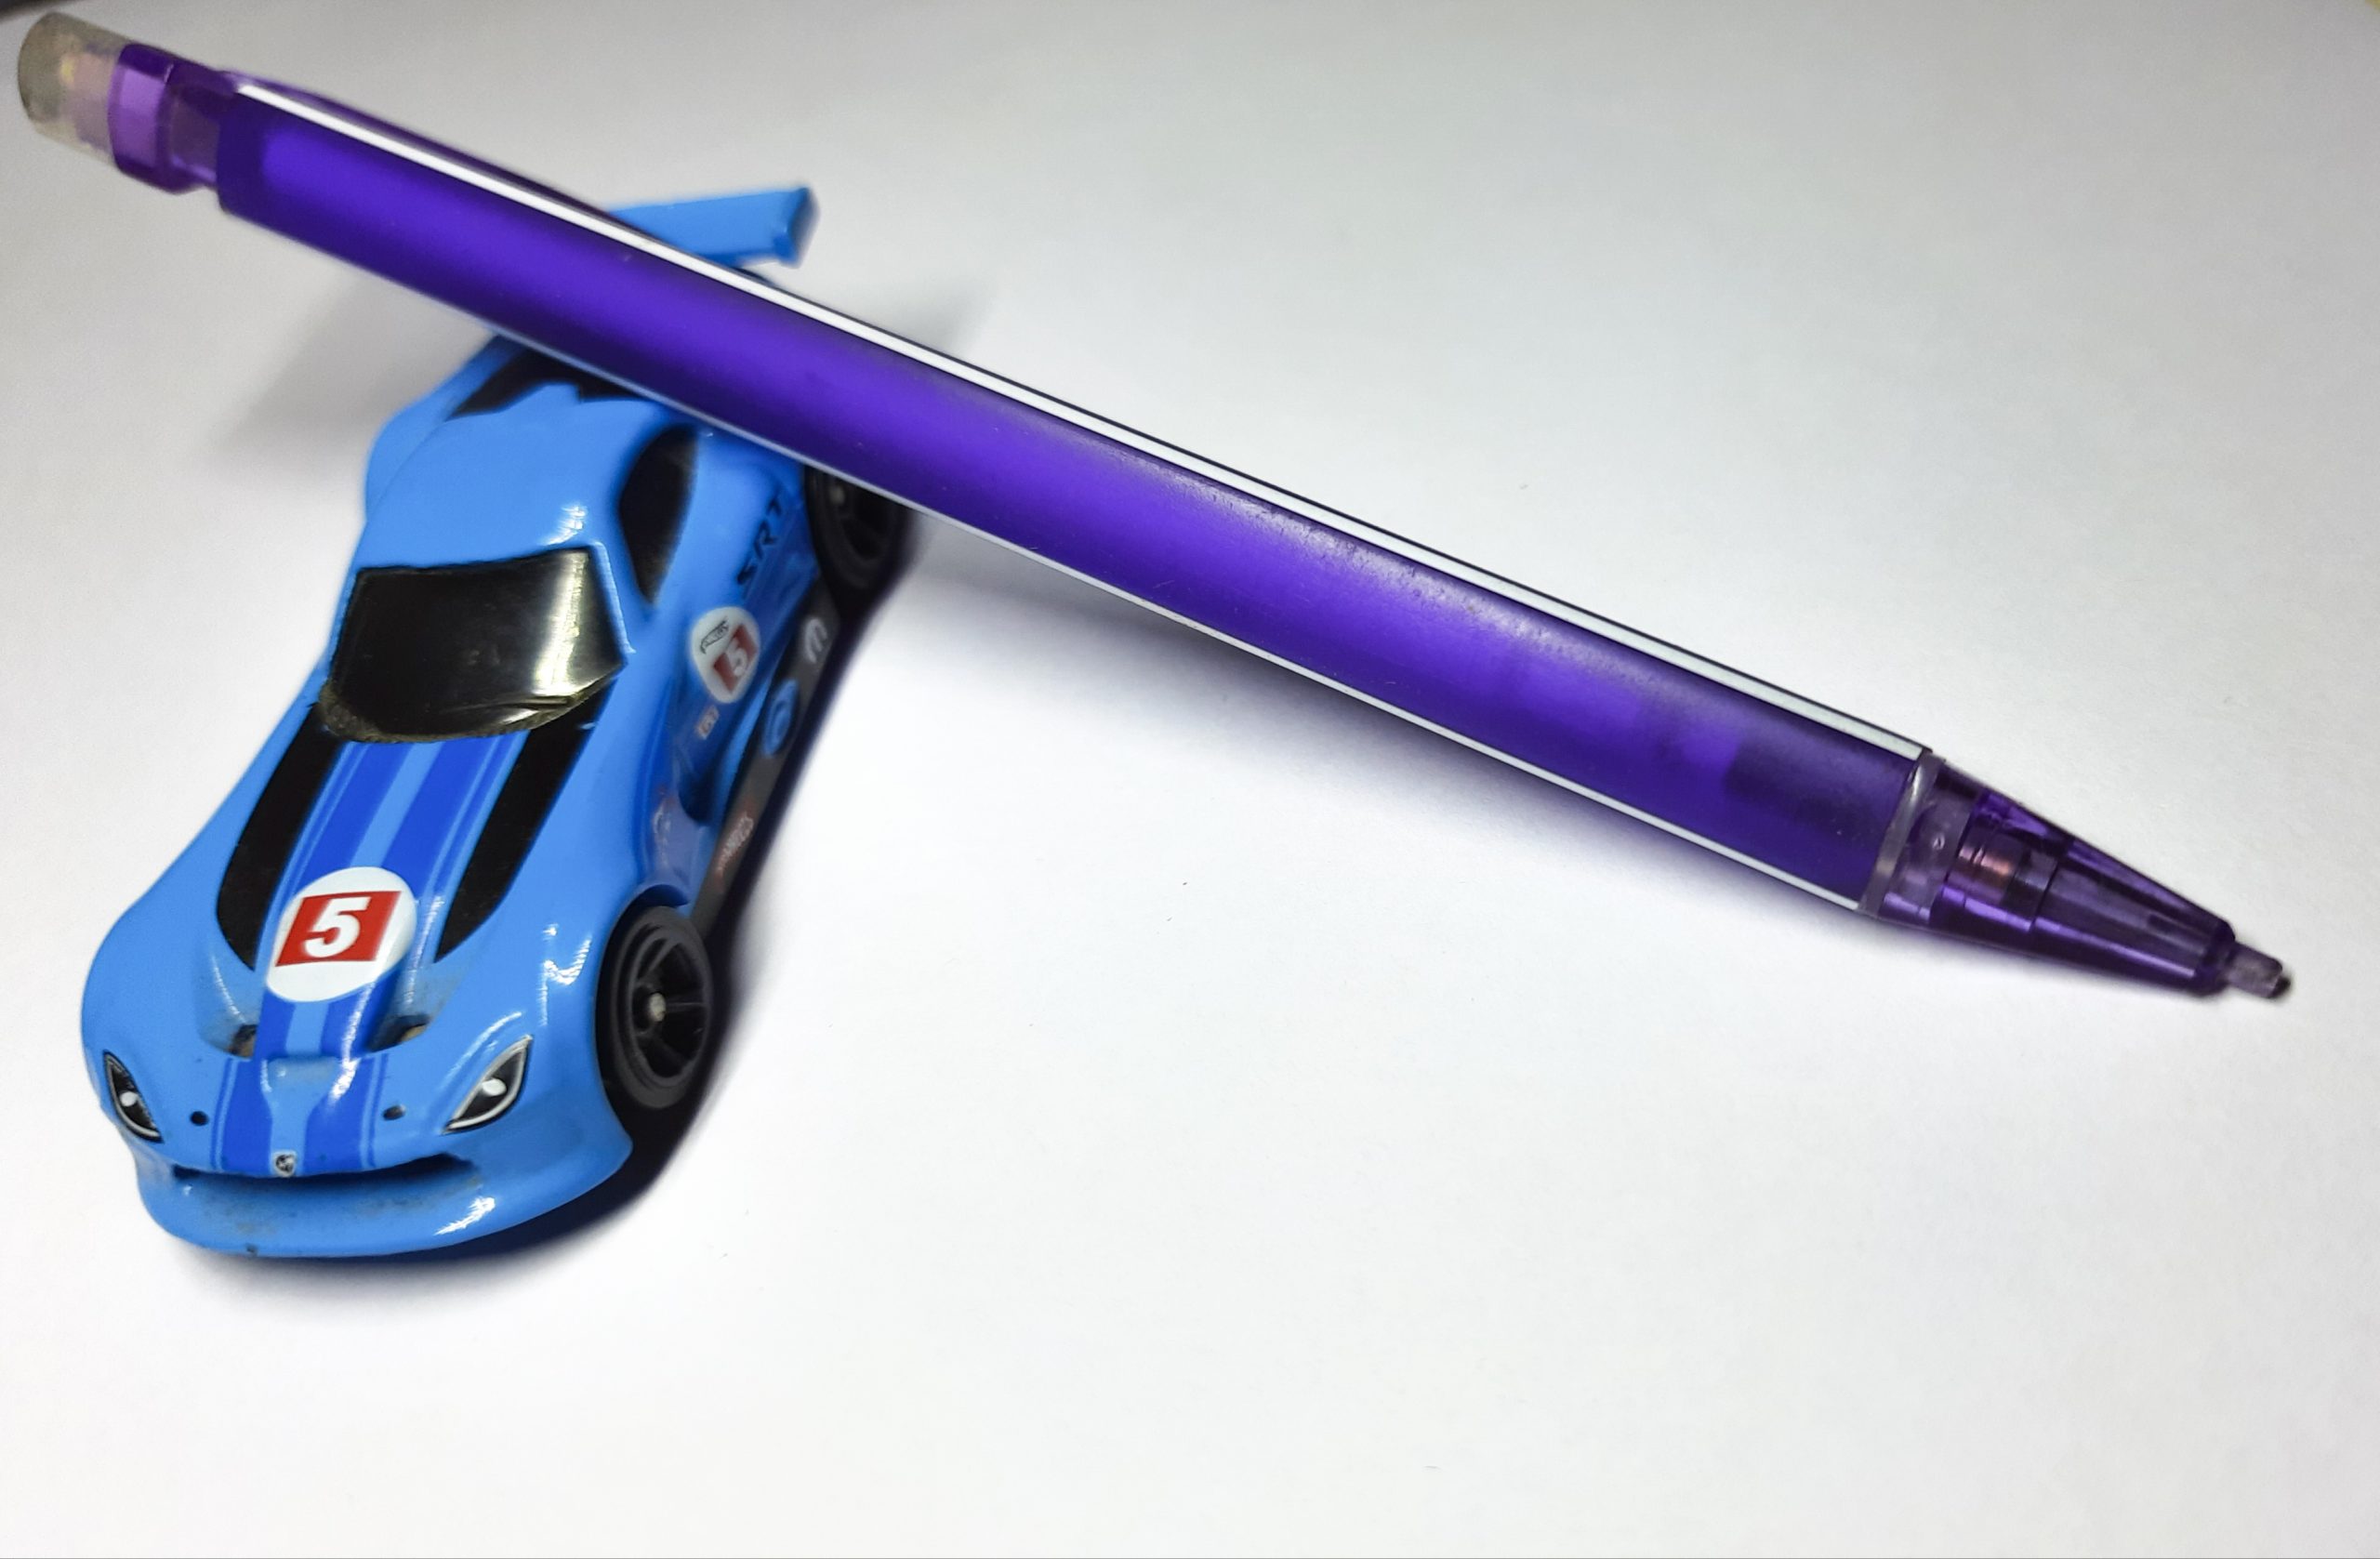 A toy car and pen